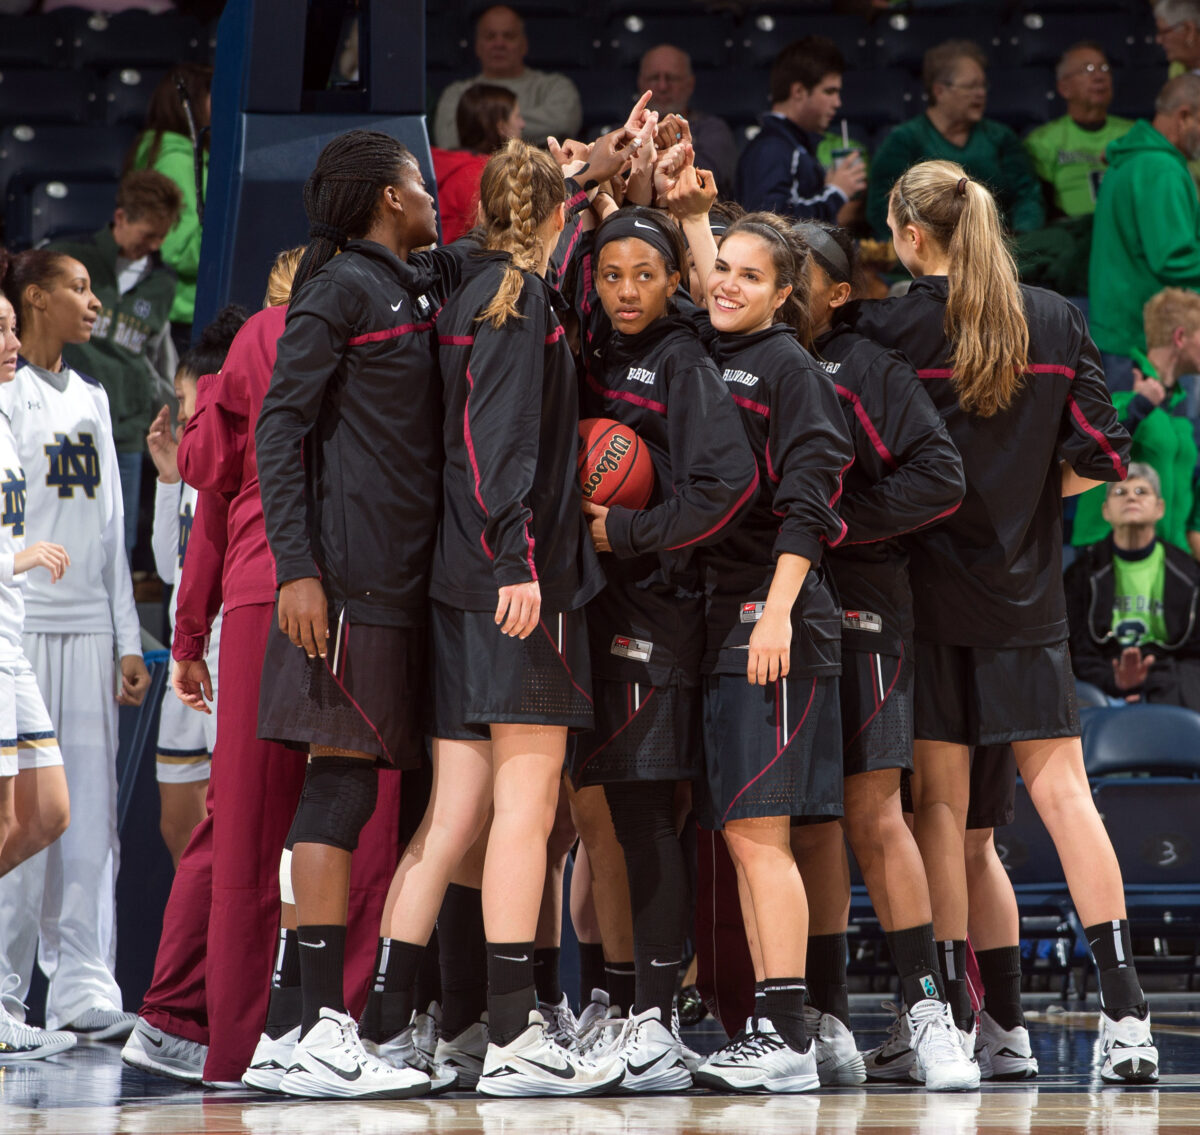 No. 16 seed taking down No. 1 seeds, Harvard women’s basketball did it first